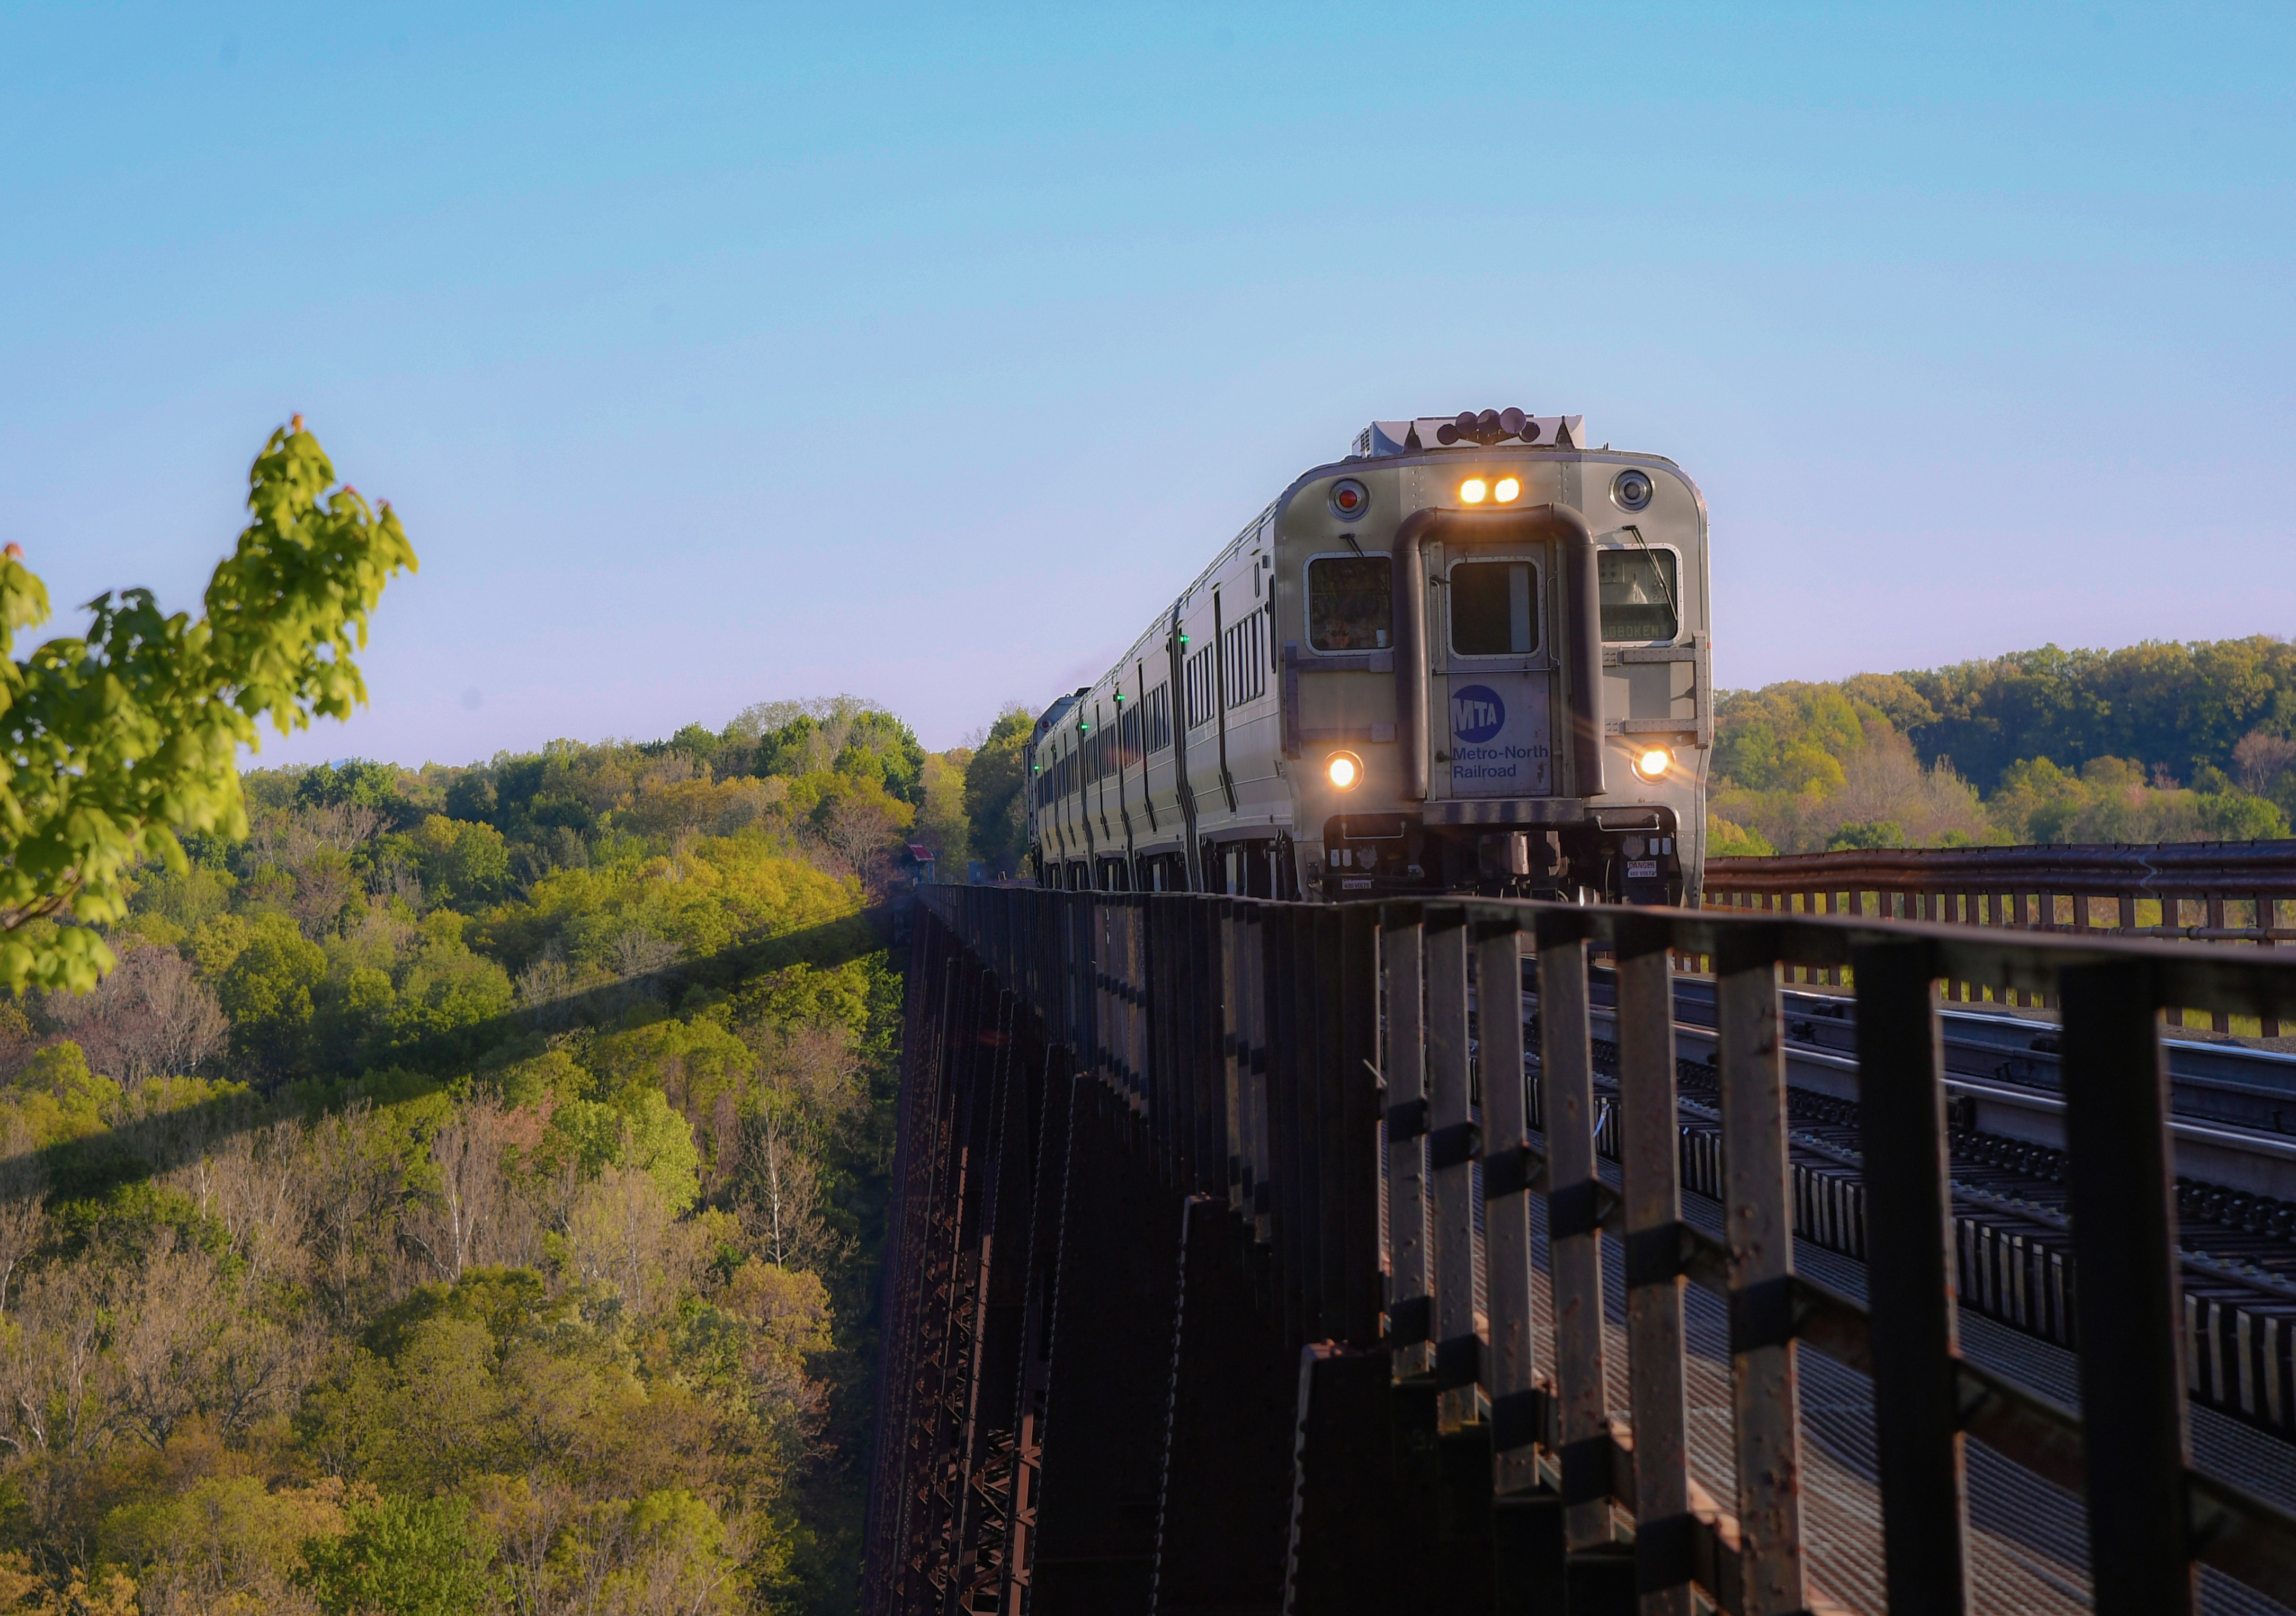 Train traveling over viaduct